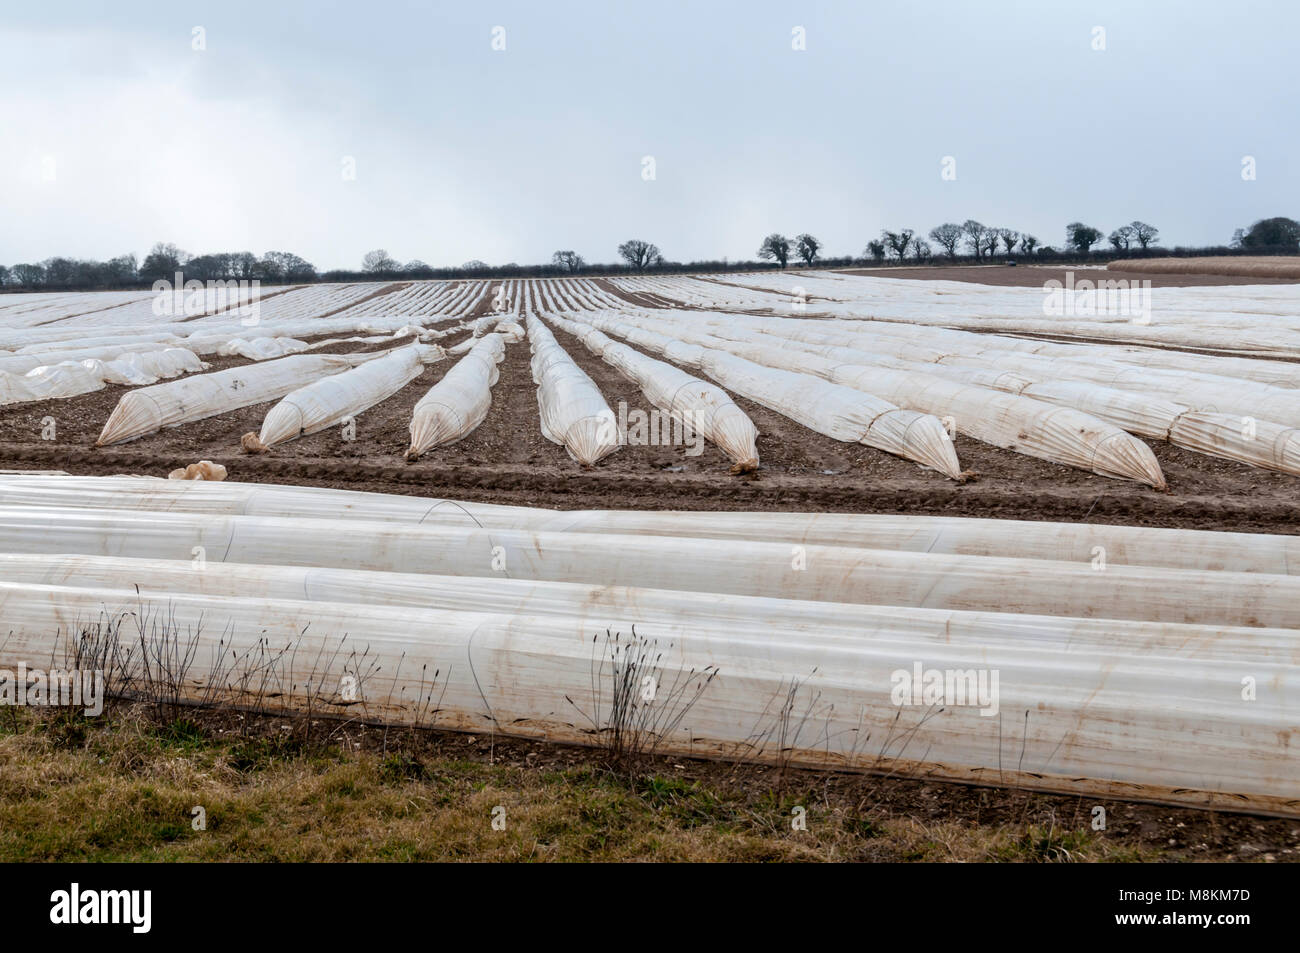 Plastic mulch on a field in Norfolk, to warm the soil and protect young crops. Stock Photo